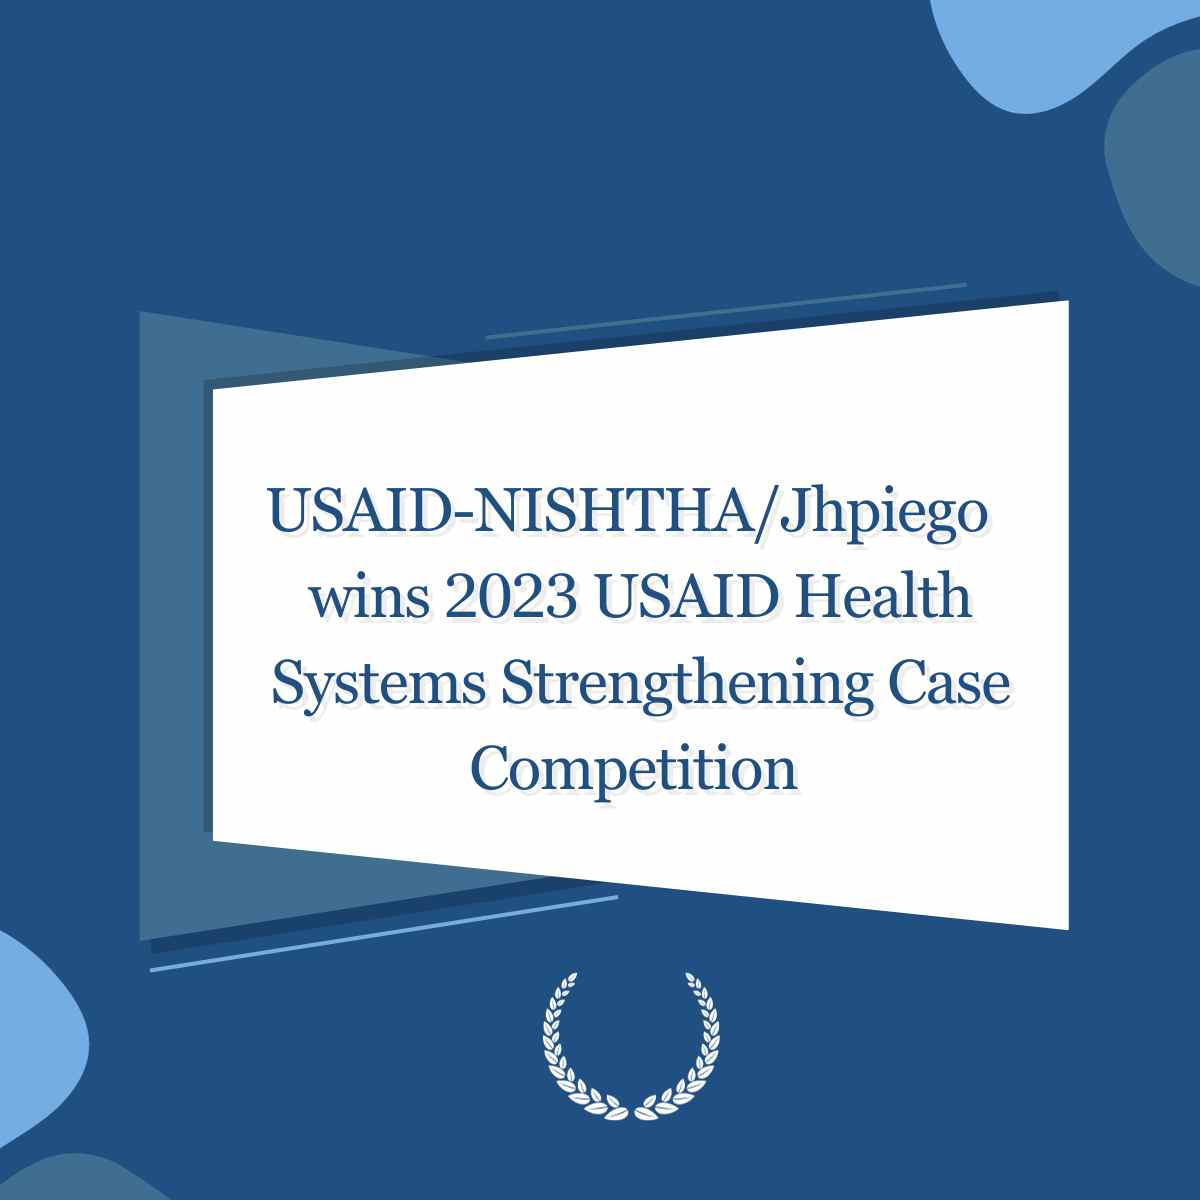 We have come this far! Acknowledgments like these give us more strength to work harder each day for better #healthcare service delivery. ➡️@USAID_NISHTHA wins the prestigious @USAIDGH 2023 Health Systems Strengthening Case Competition. @usaid_india @Anuradh83770718